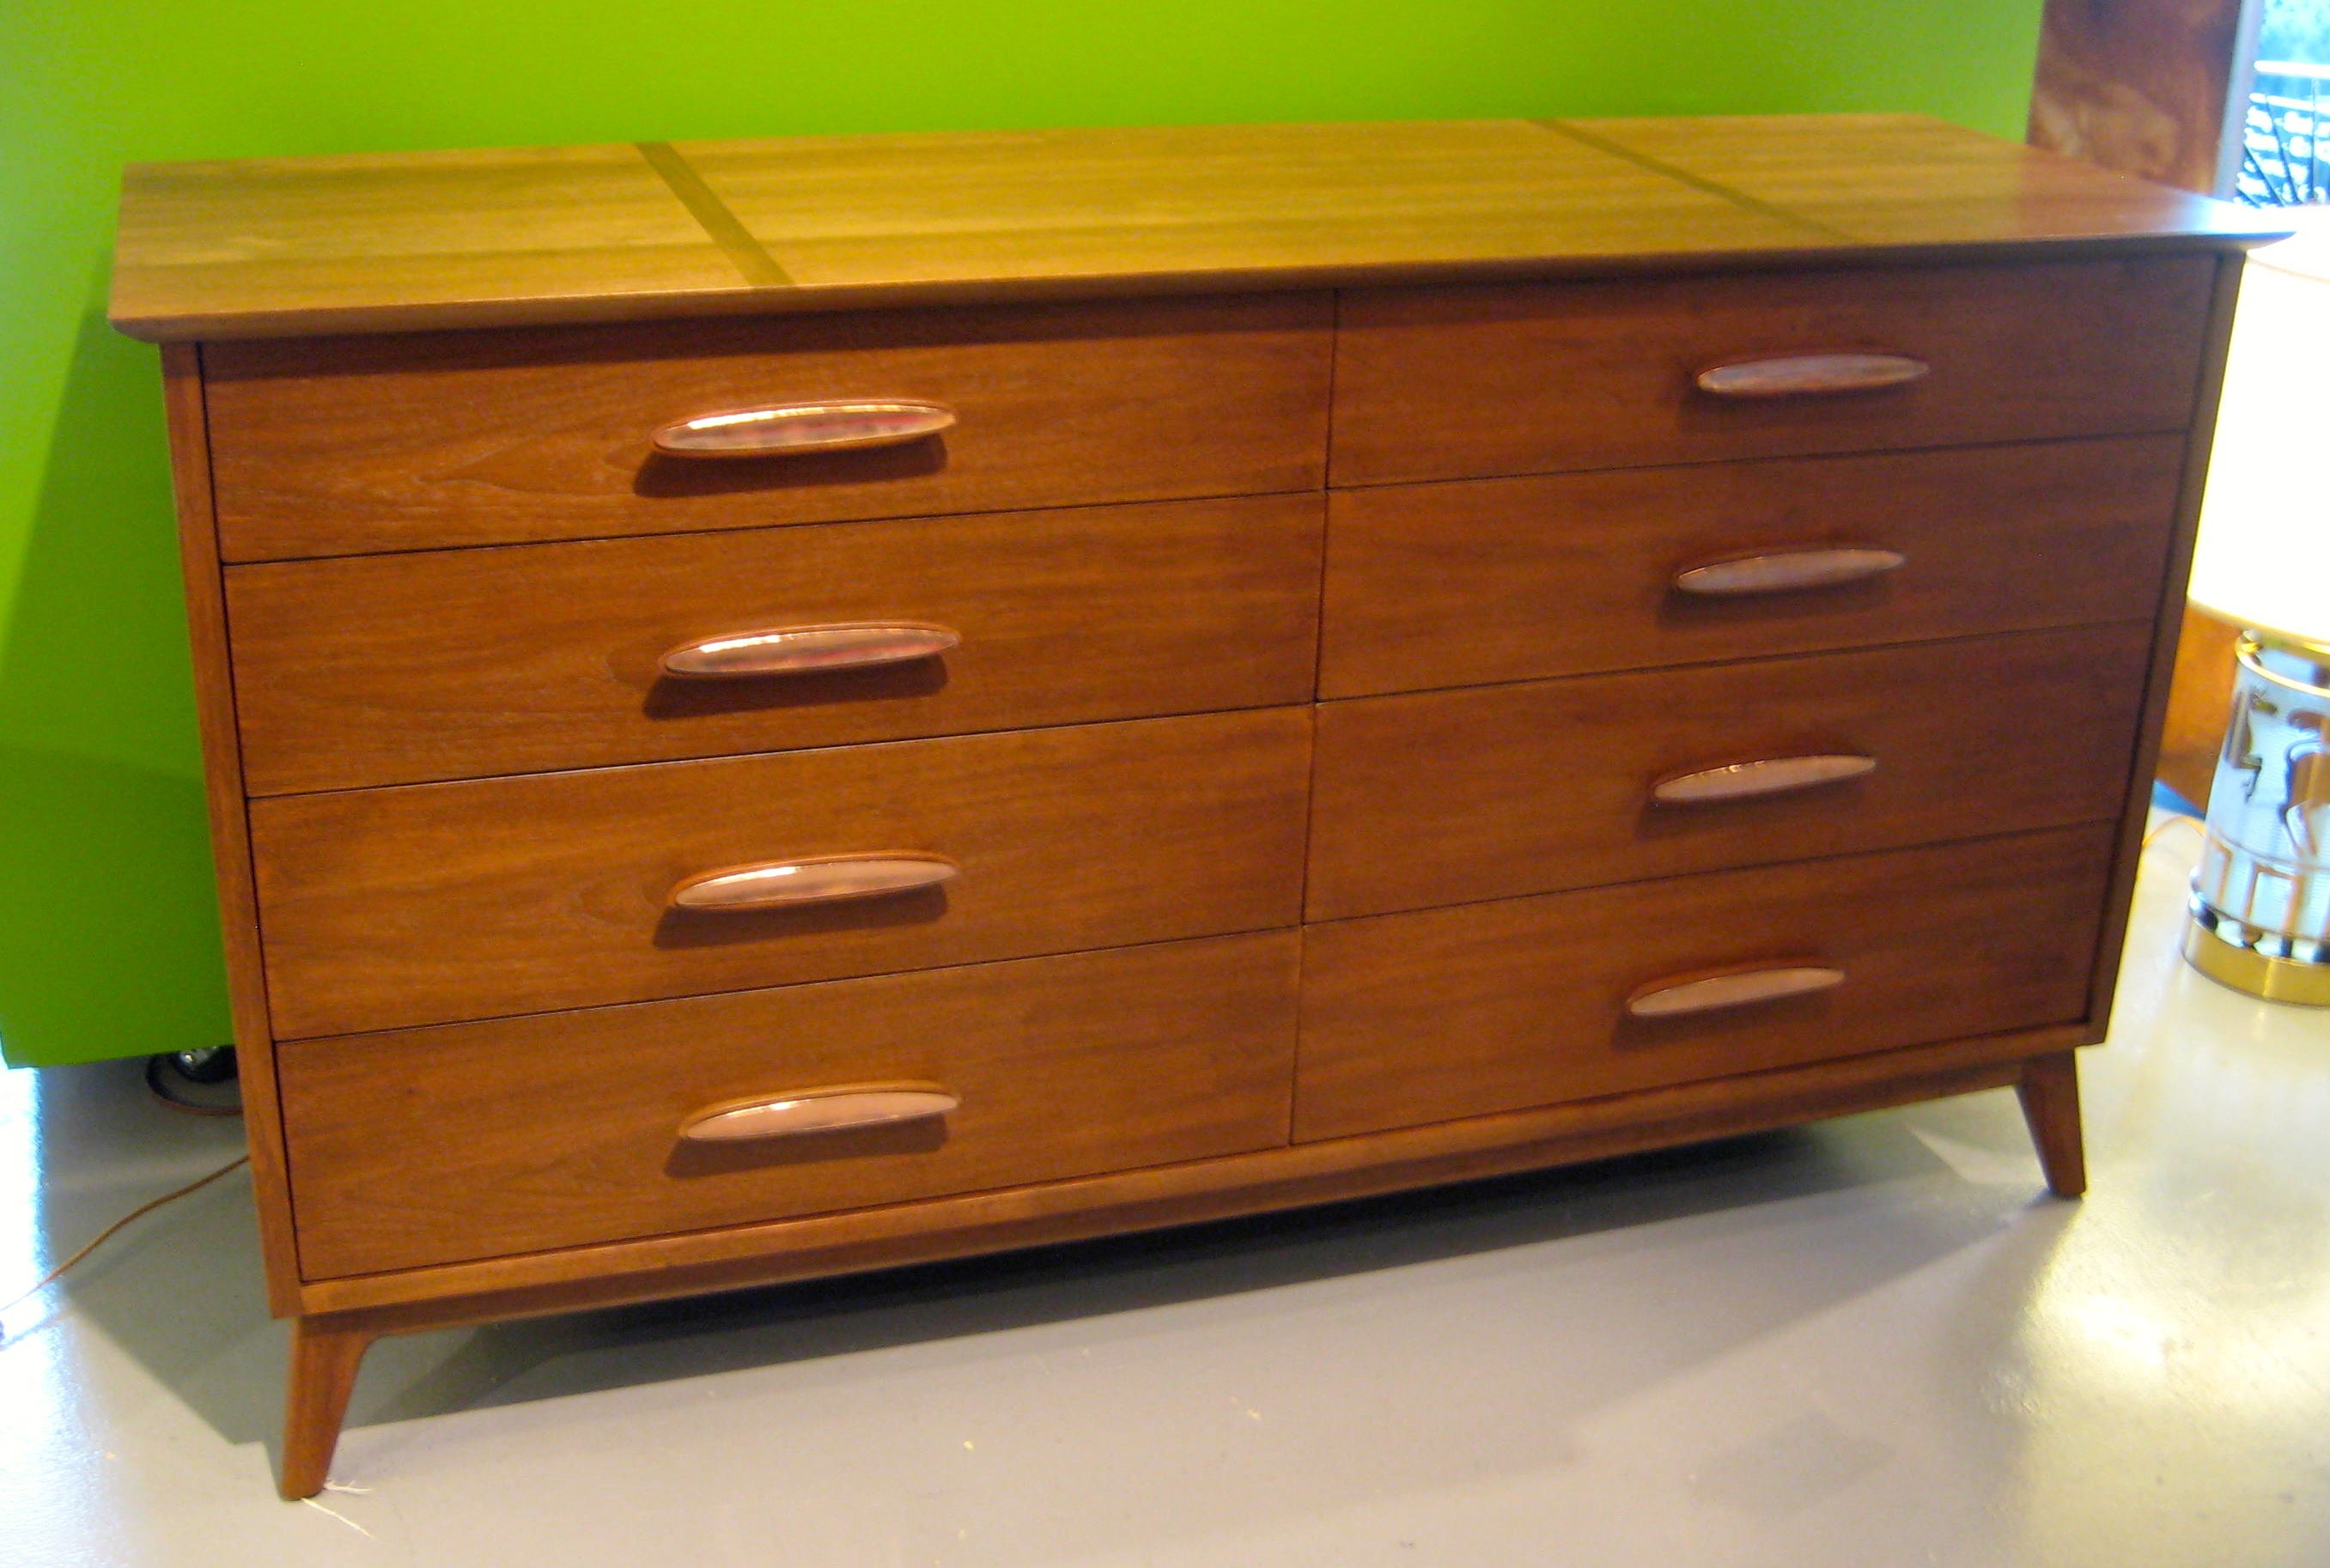 A Vintage Henredon Walnut Chest of Drawers c. 1960s